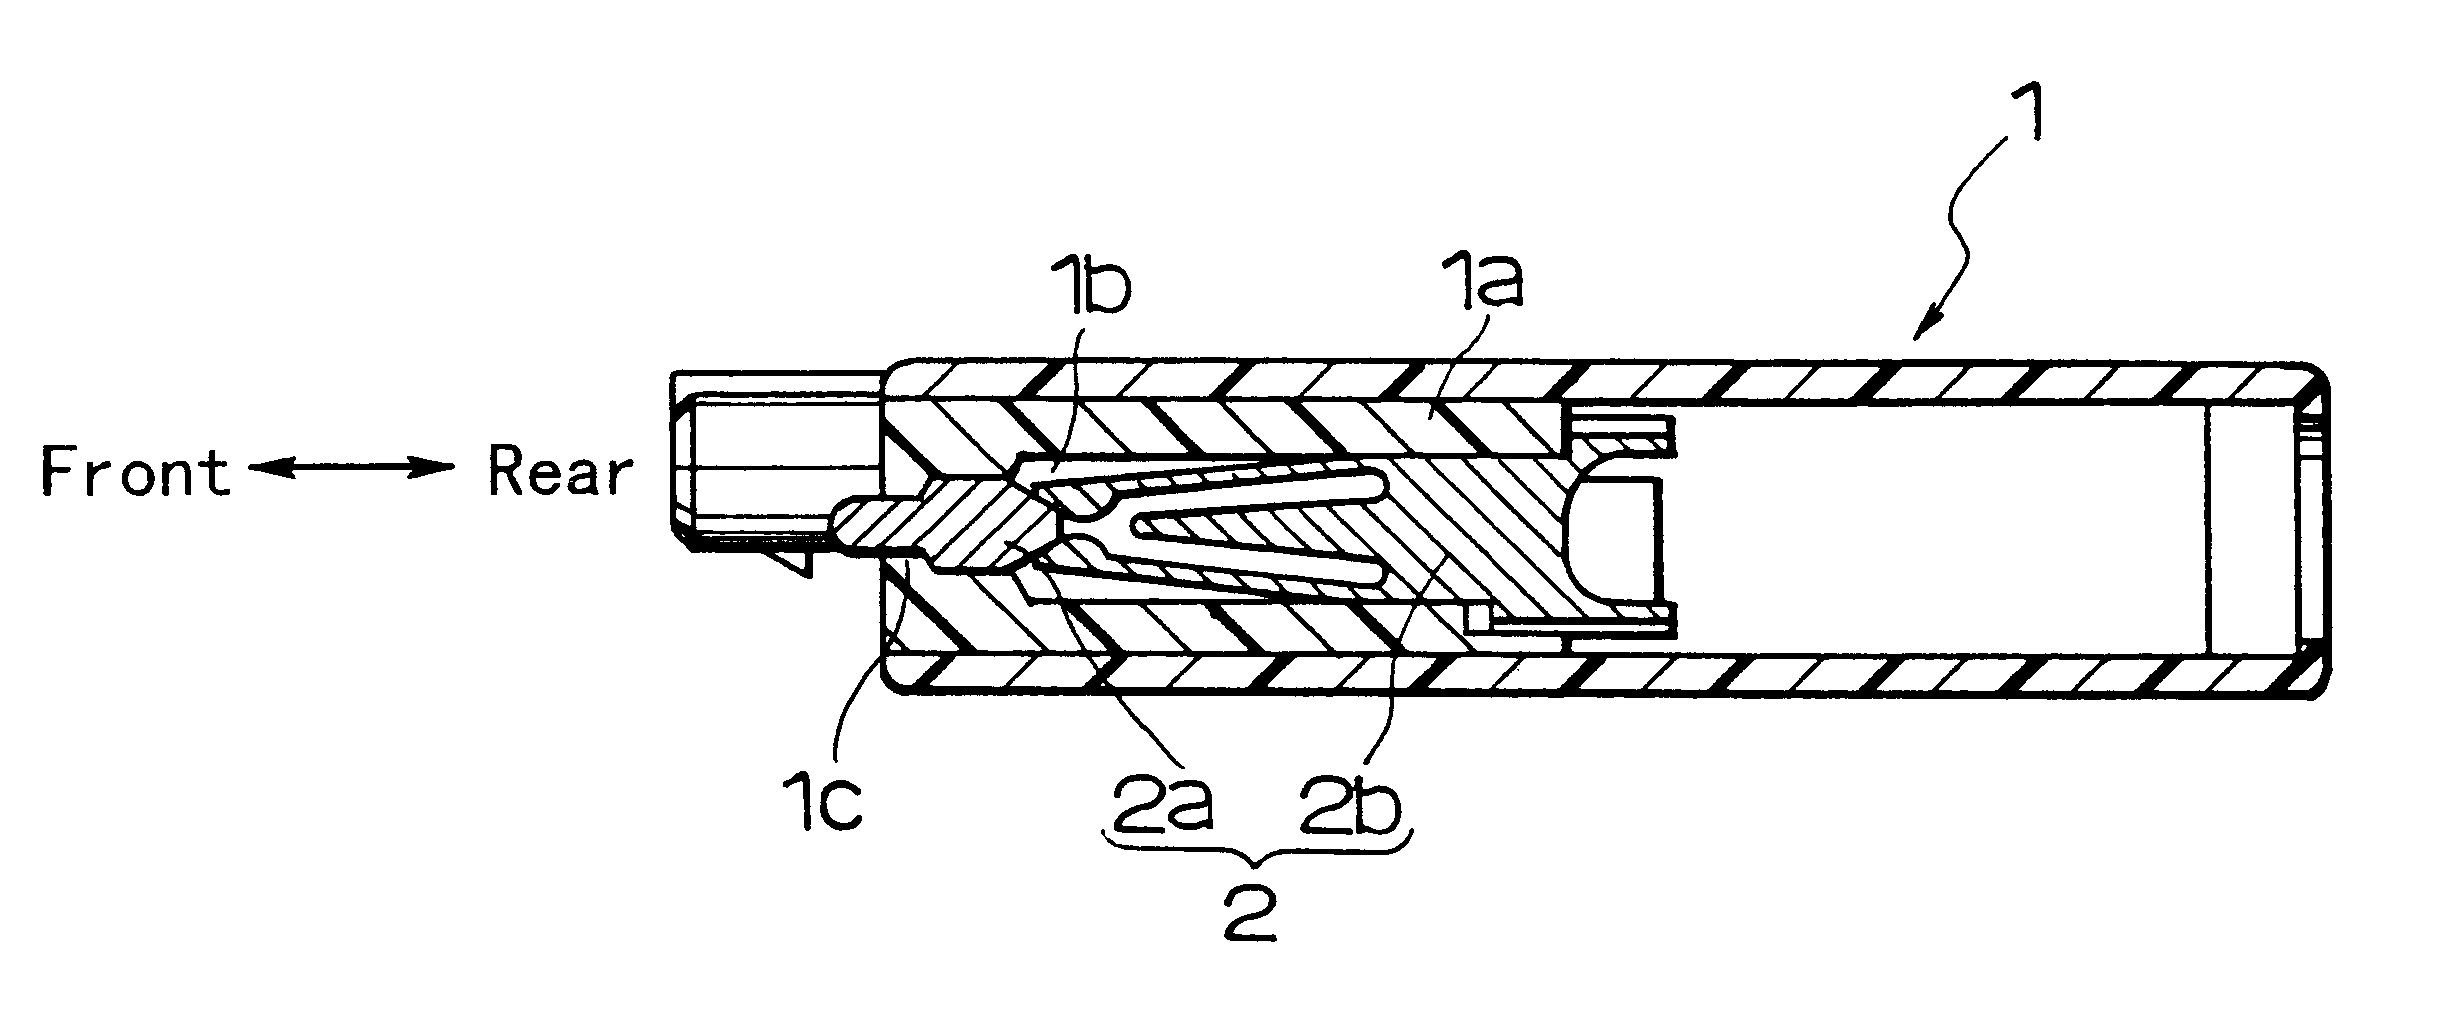 Electric connector having depressible contact pieces capable of conveying a relatively large current